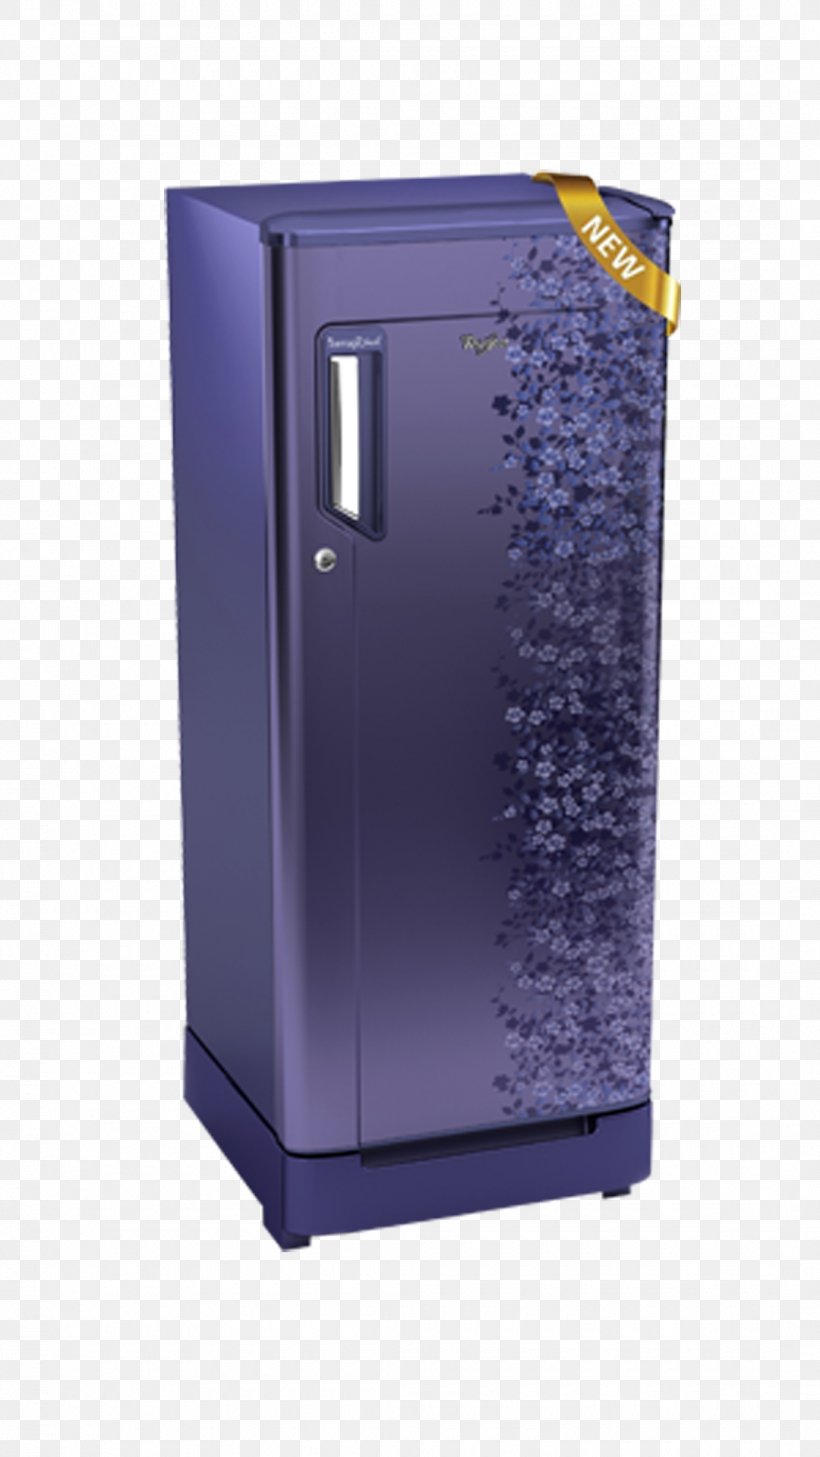 Direct Cool Whirlpool Corporation Refrigerator Auto-defrost Whirlpool Of India Limited, PNG, 1080x1920px, Direct Cool, Autodefrost, Business, Home Appliance, Ice Makers Download Free